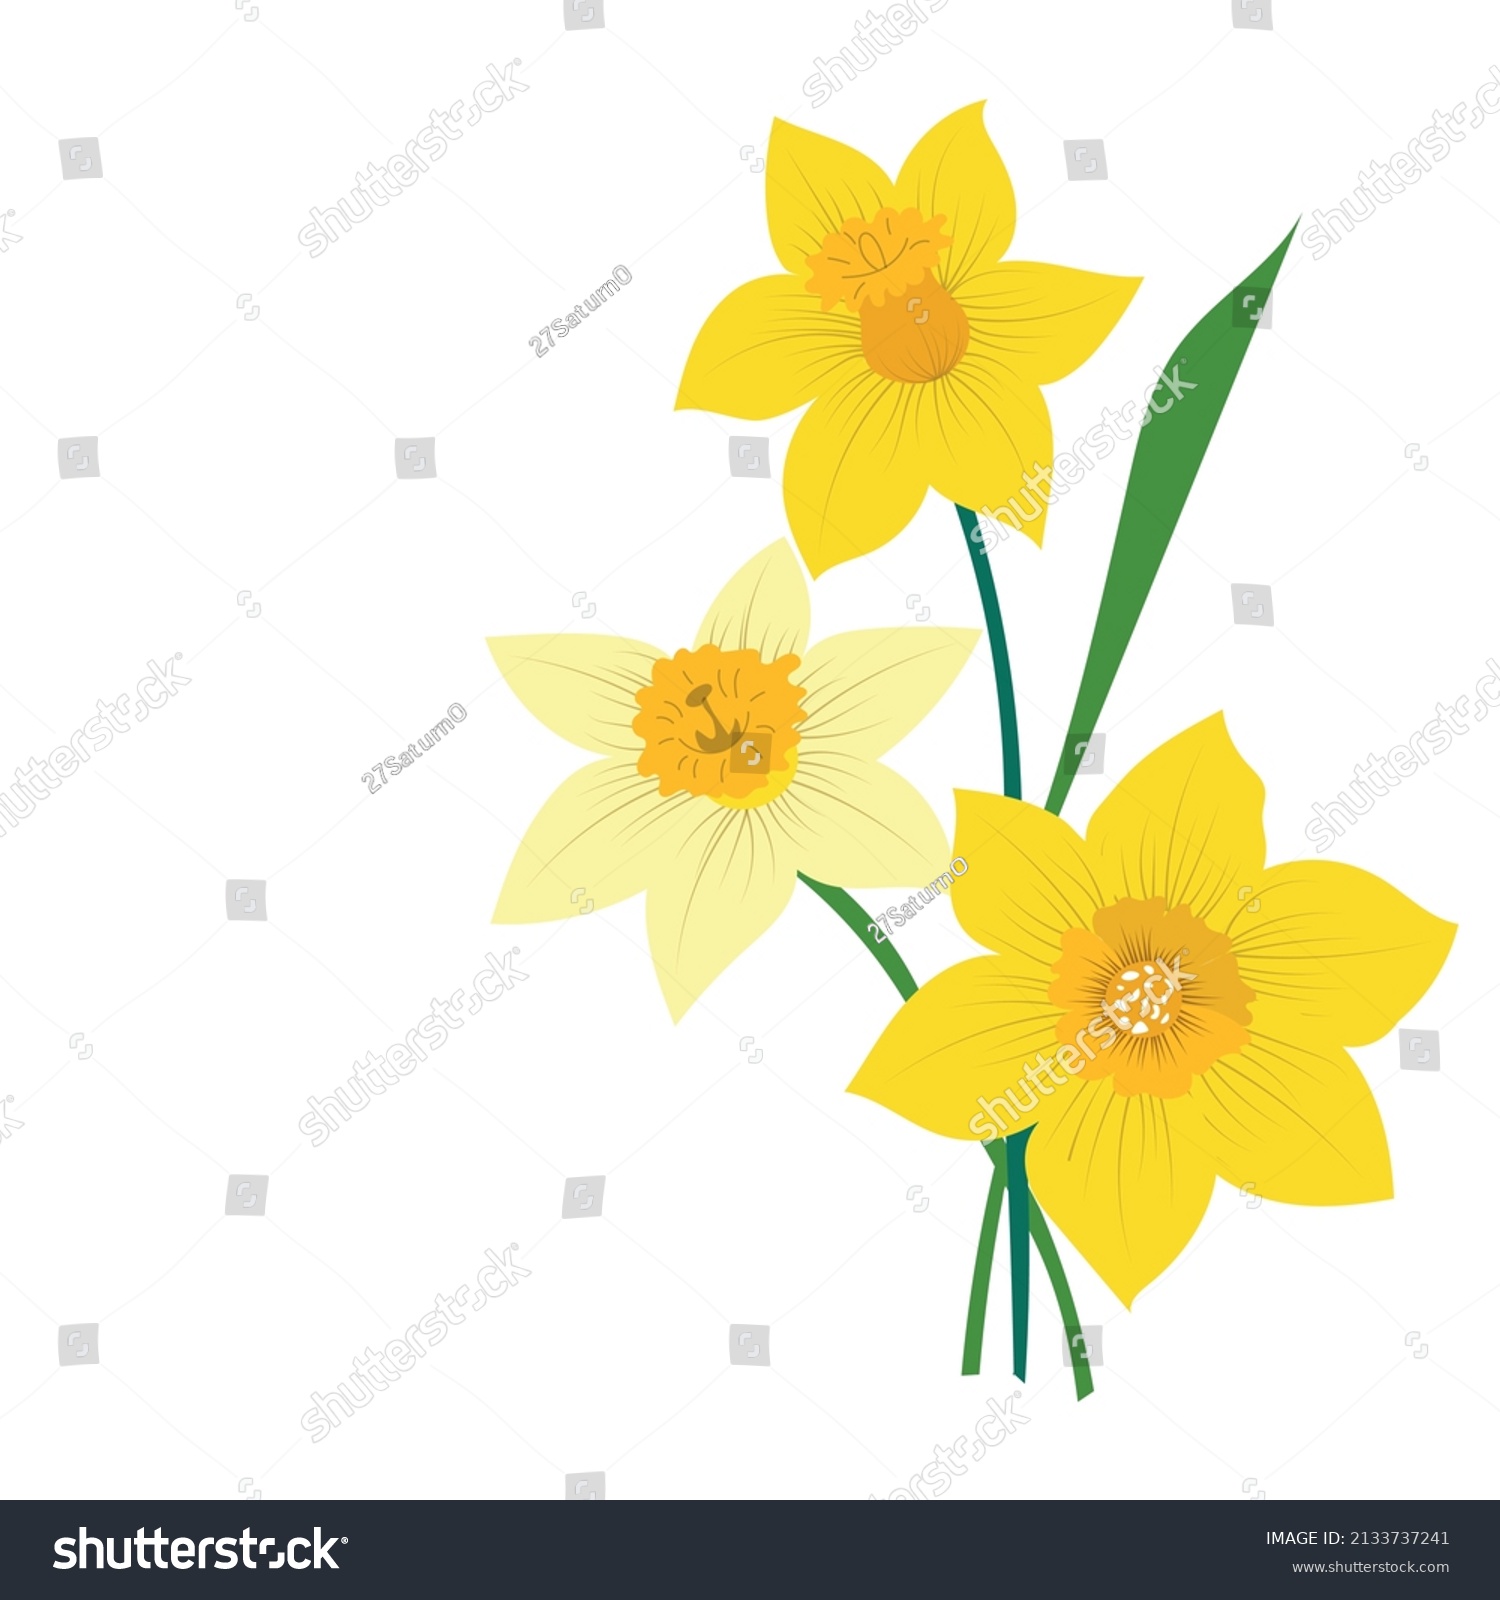 SVG of Narcissus flowers isolated on white background. Vector illustration. svg